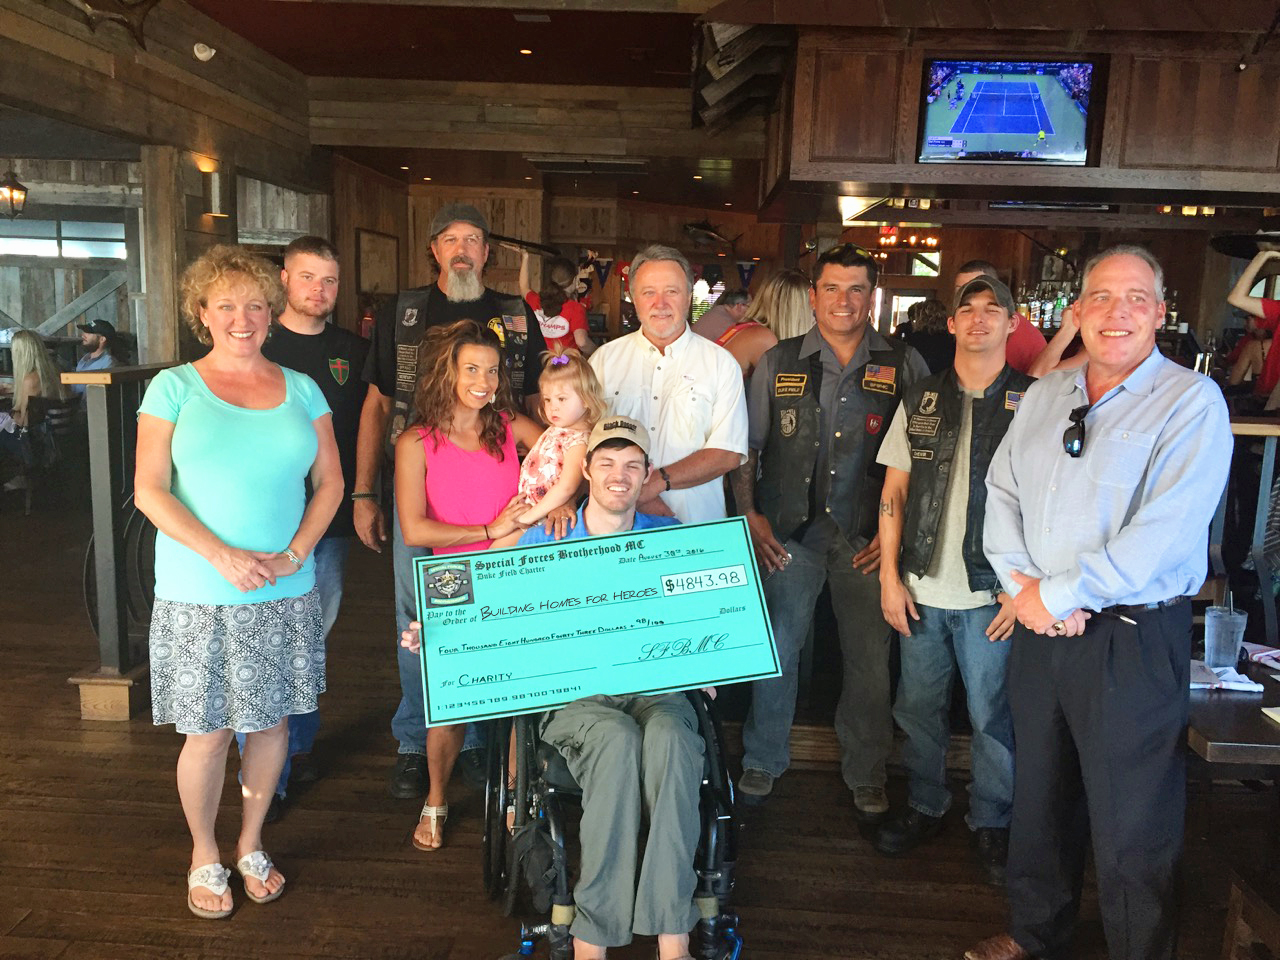 Military Motorcycle Club members presenting a large check to a man in a wheelchair